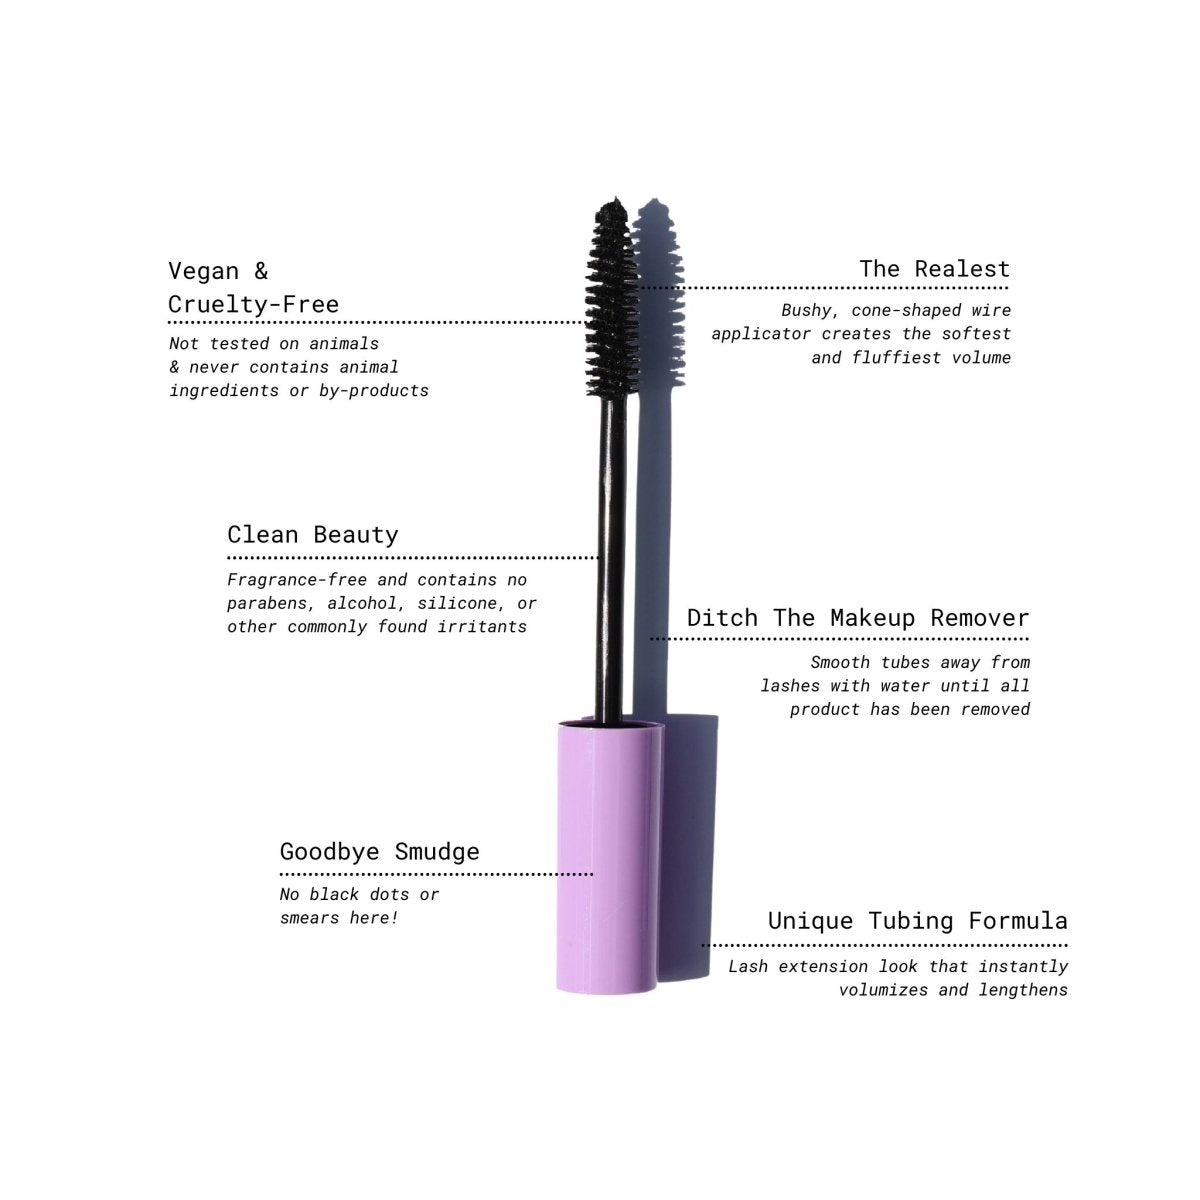 Natural Lash Extensions Tubing Mascara - Totally Tubular in The Realest by Half Caked Makeup